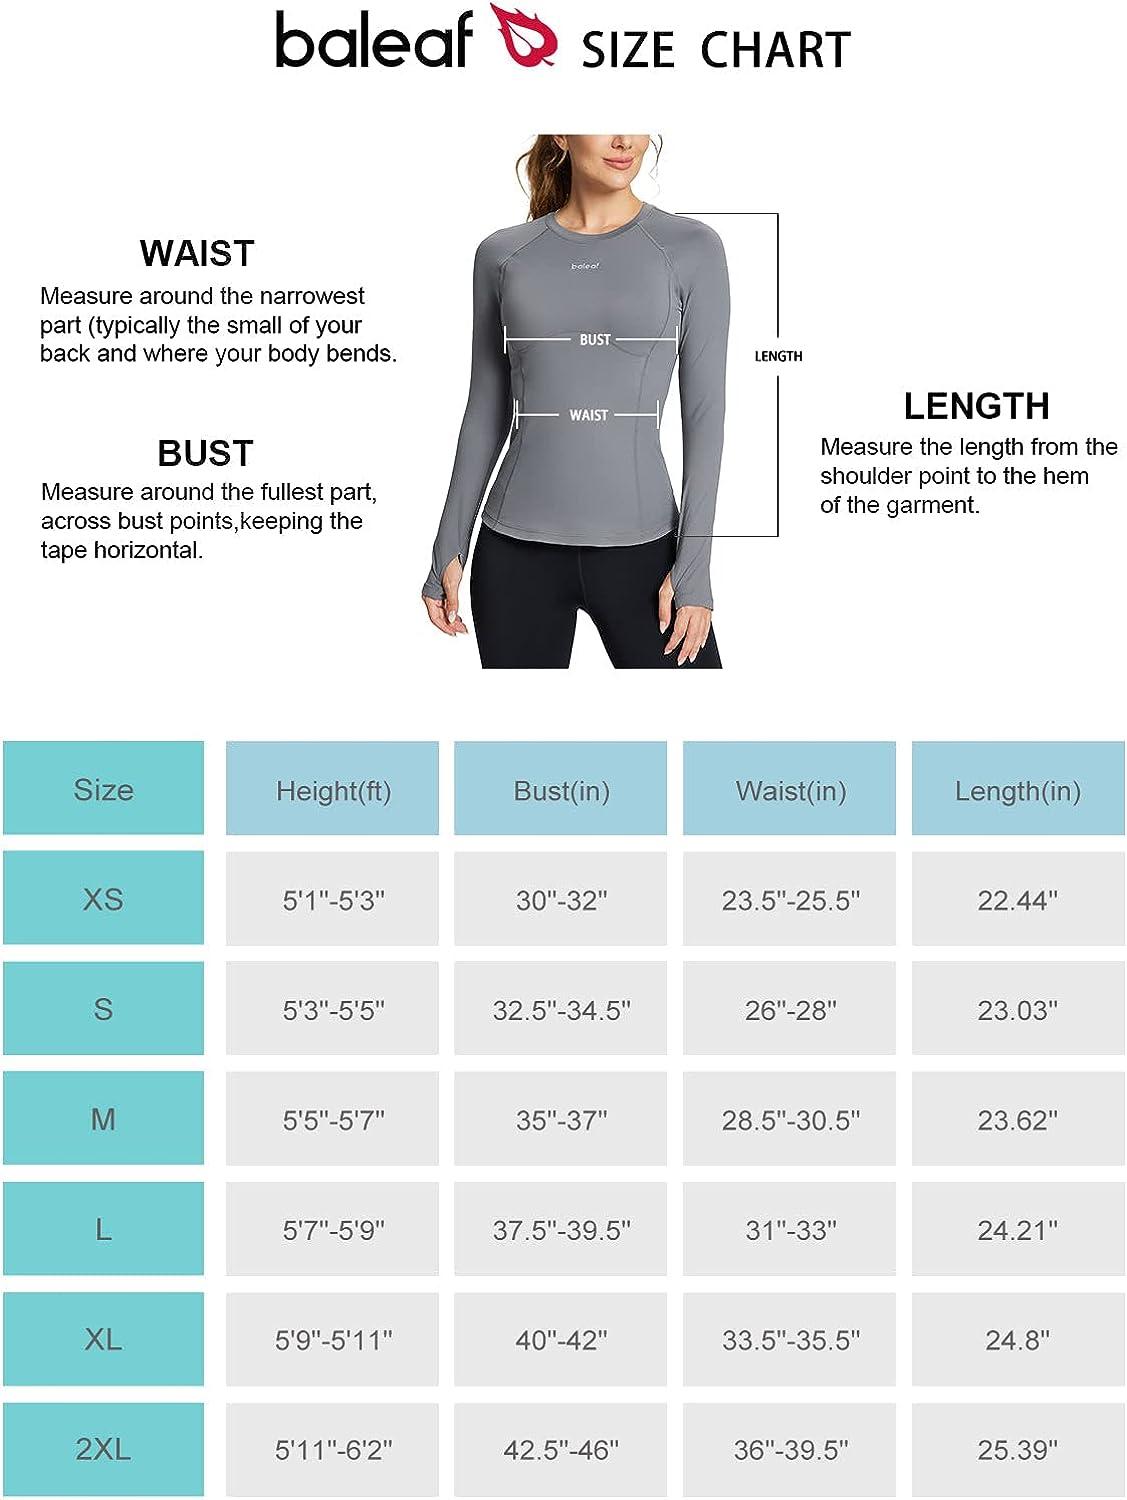 NEW BALEAF Women's Long Sleeve Running Shirts Athletic Workout Tops SIZE   L